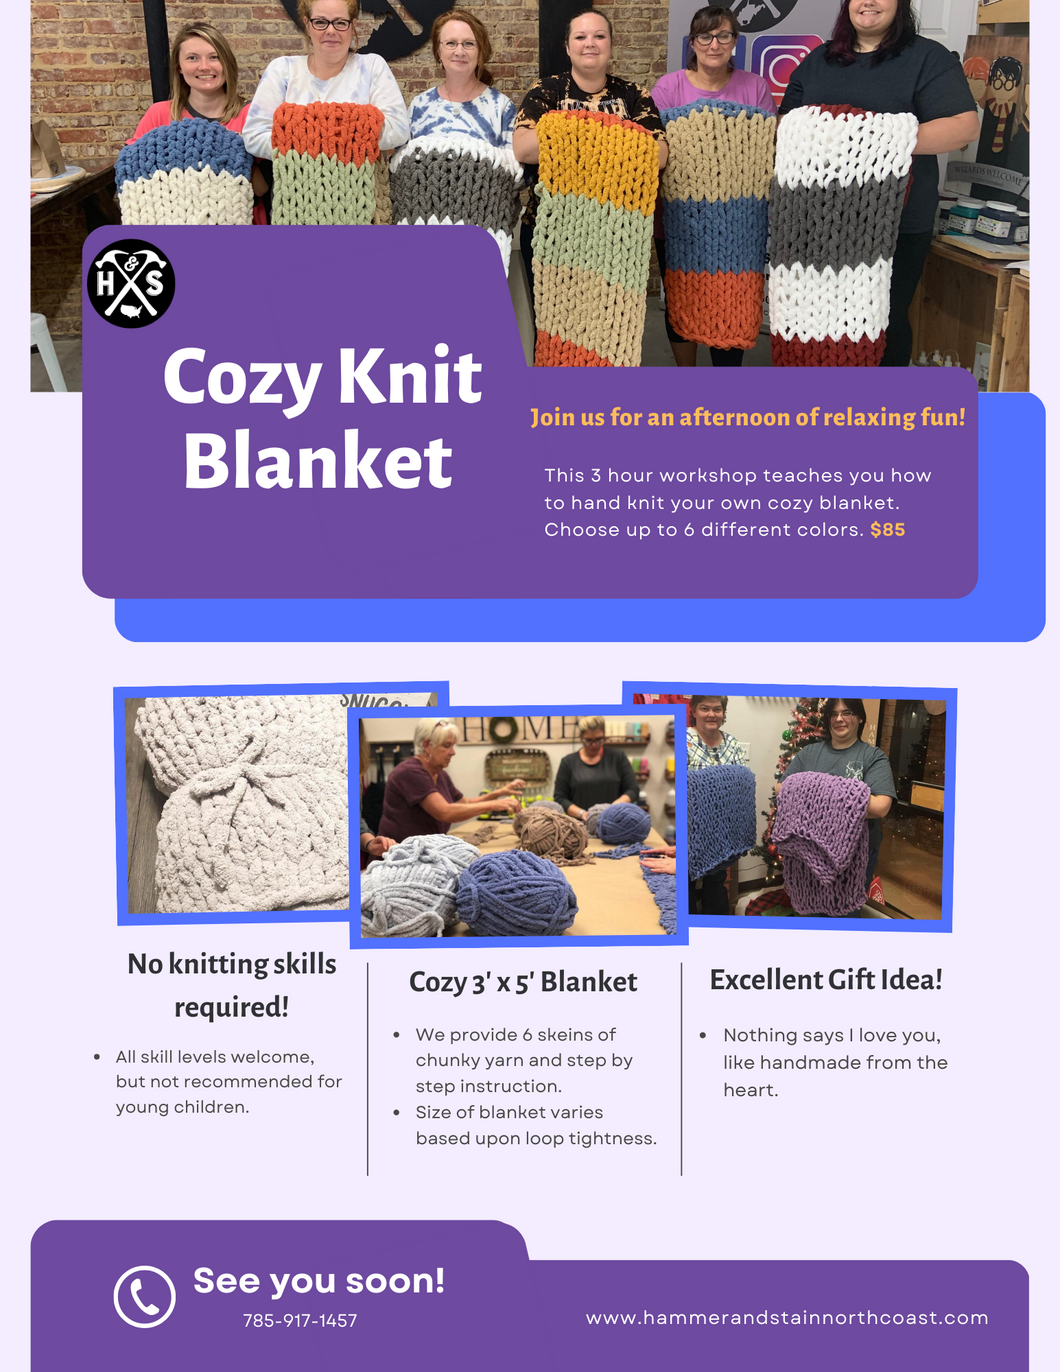 Cozy Knit Blankets – Hammer and Stain North Coast